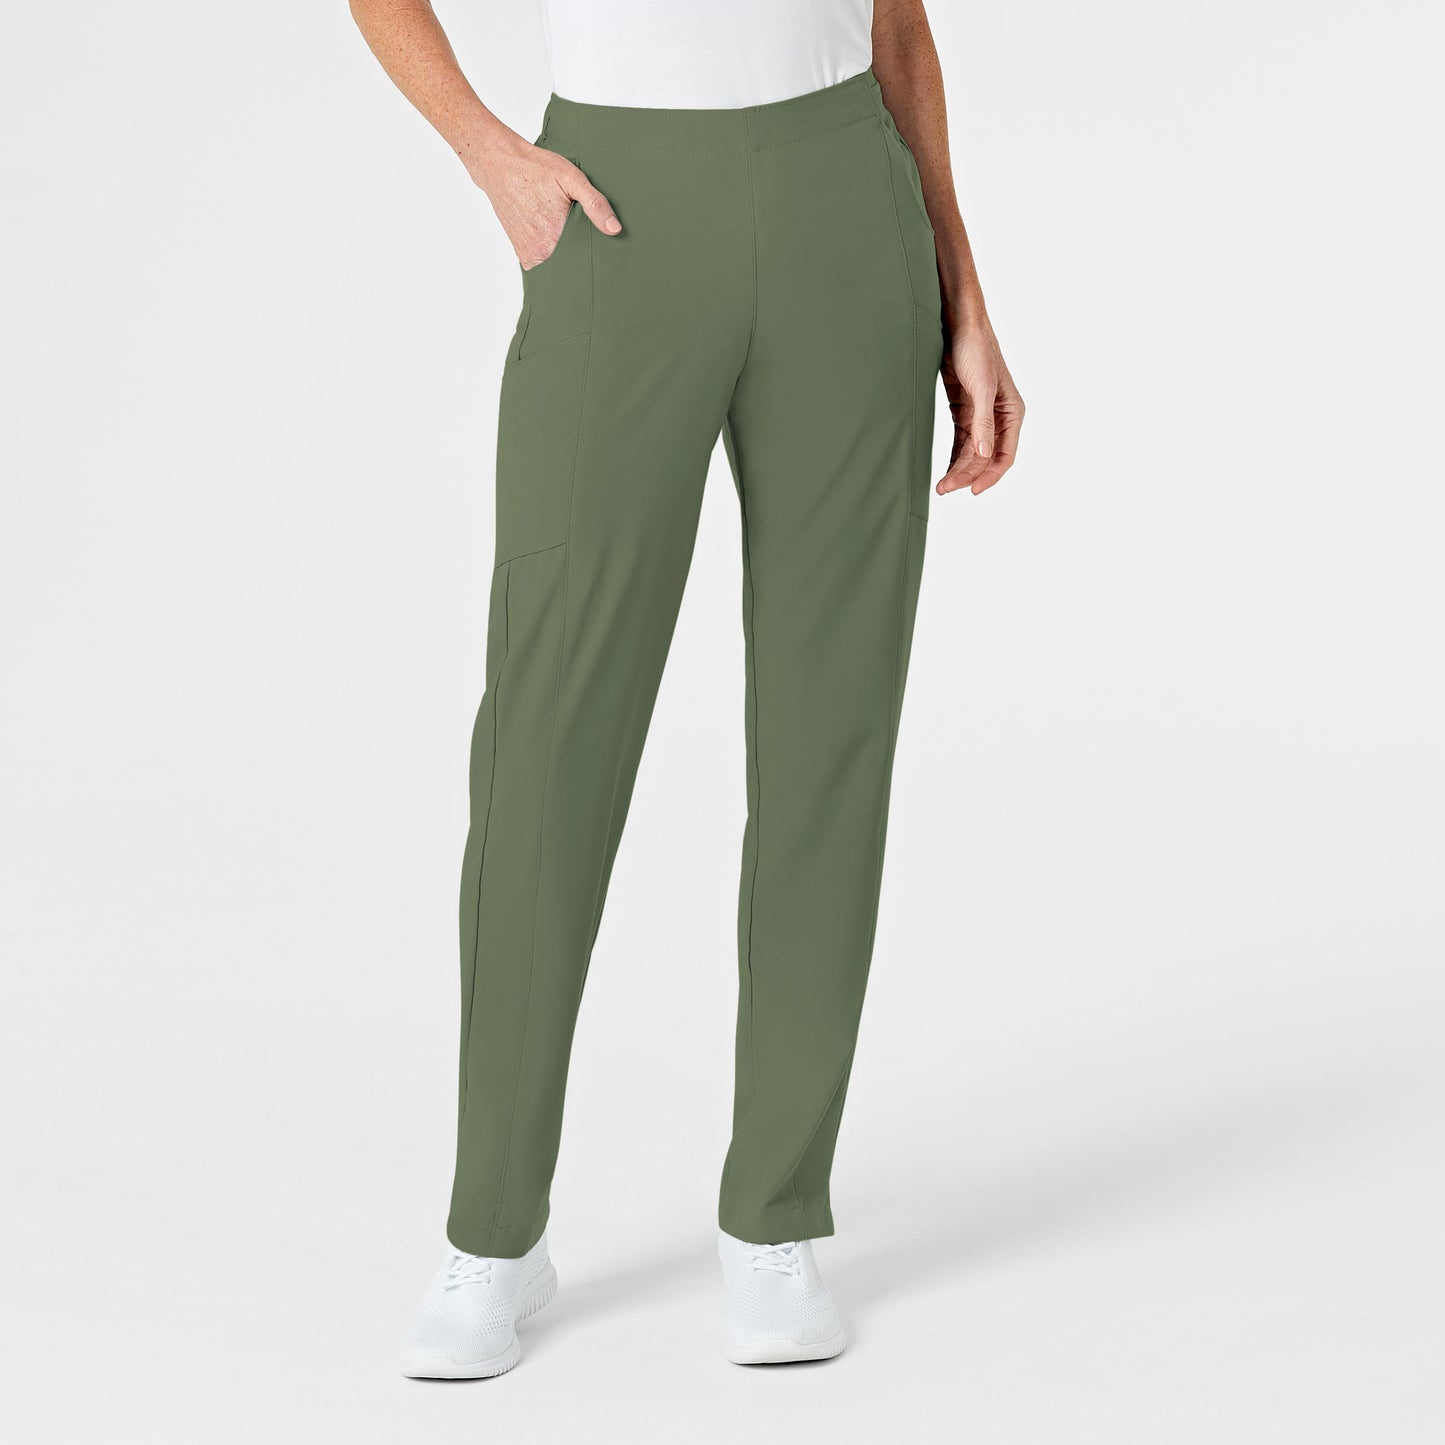 W123 Women's Flat Front Double Cargo Pant in Black and Olive